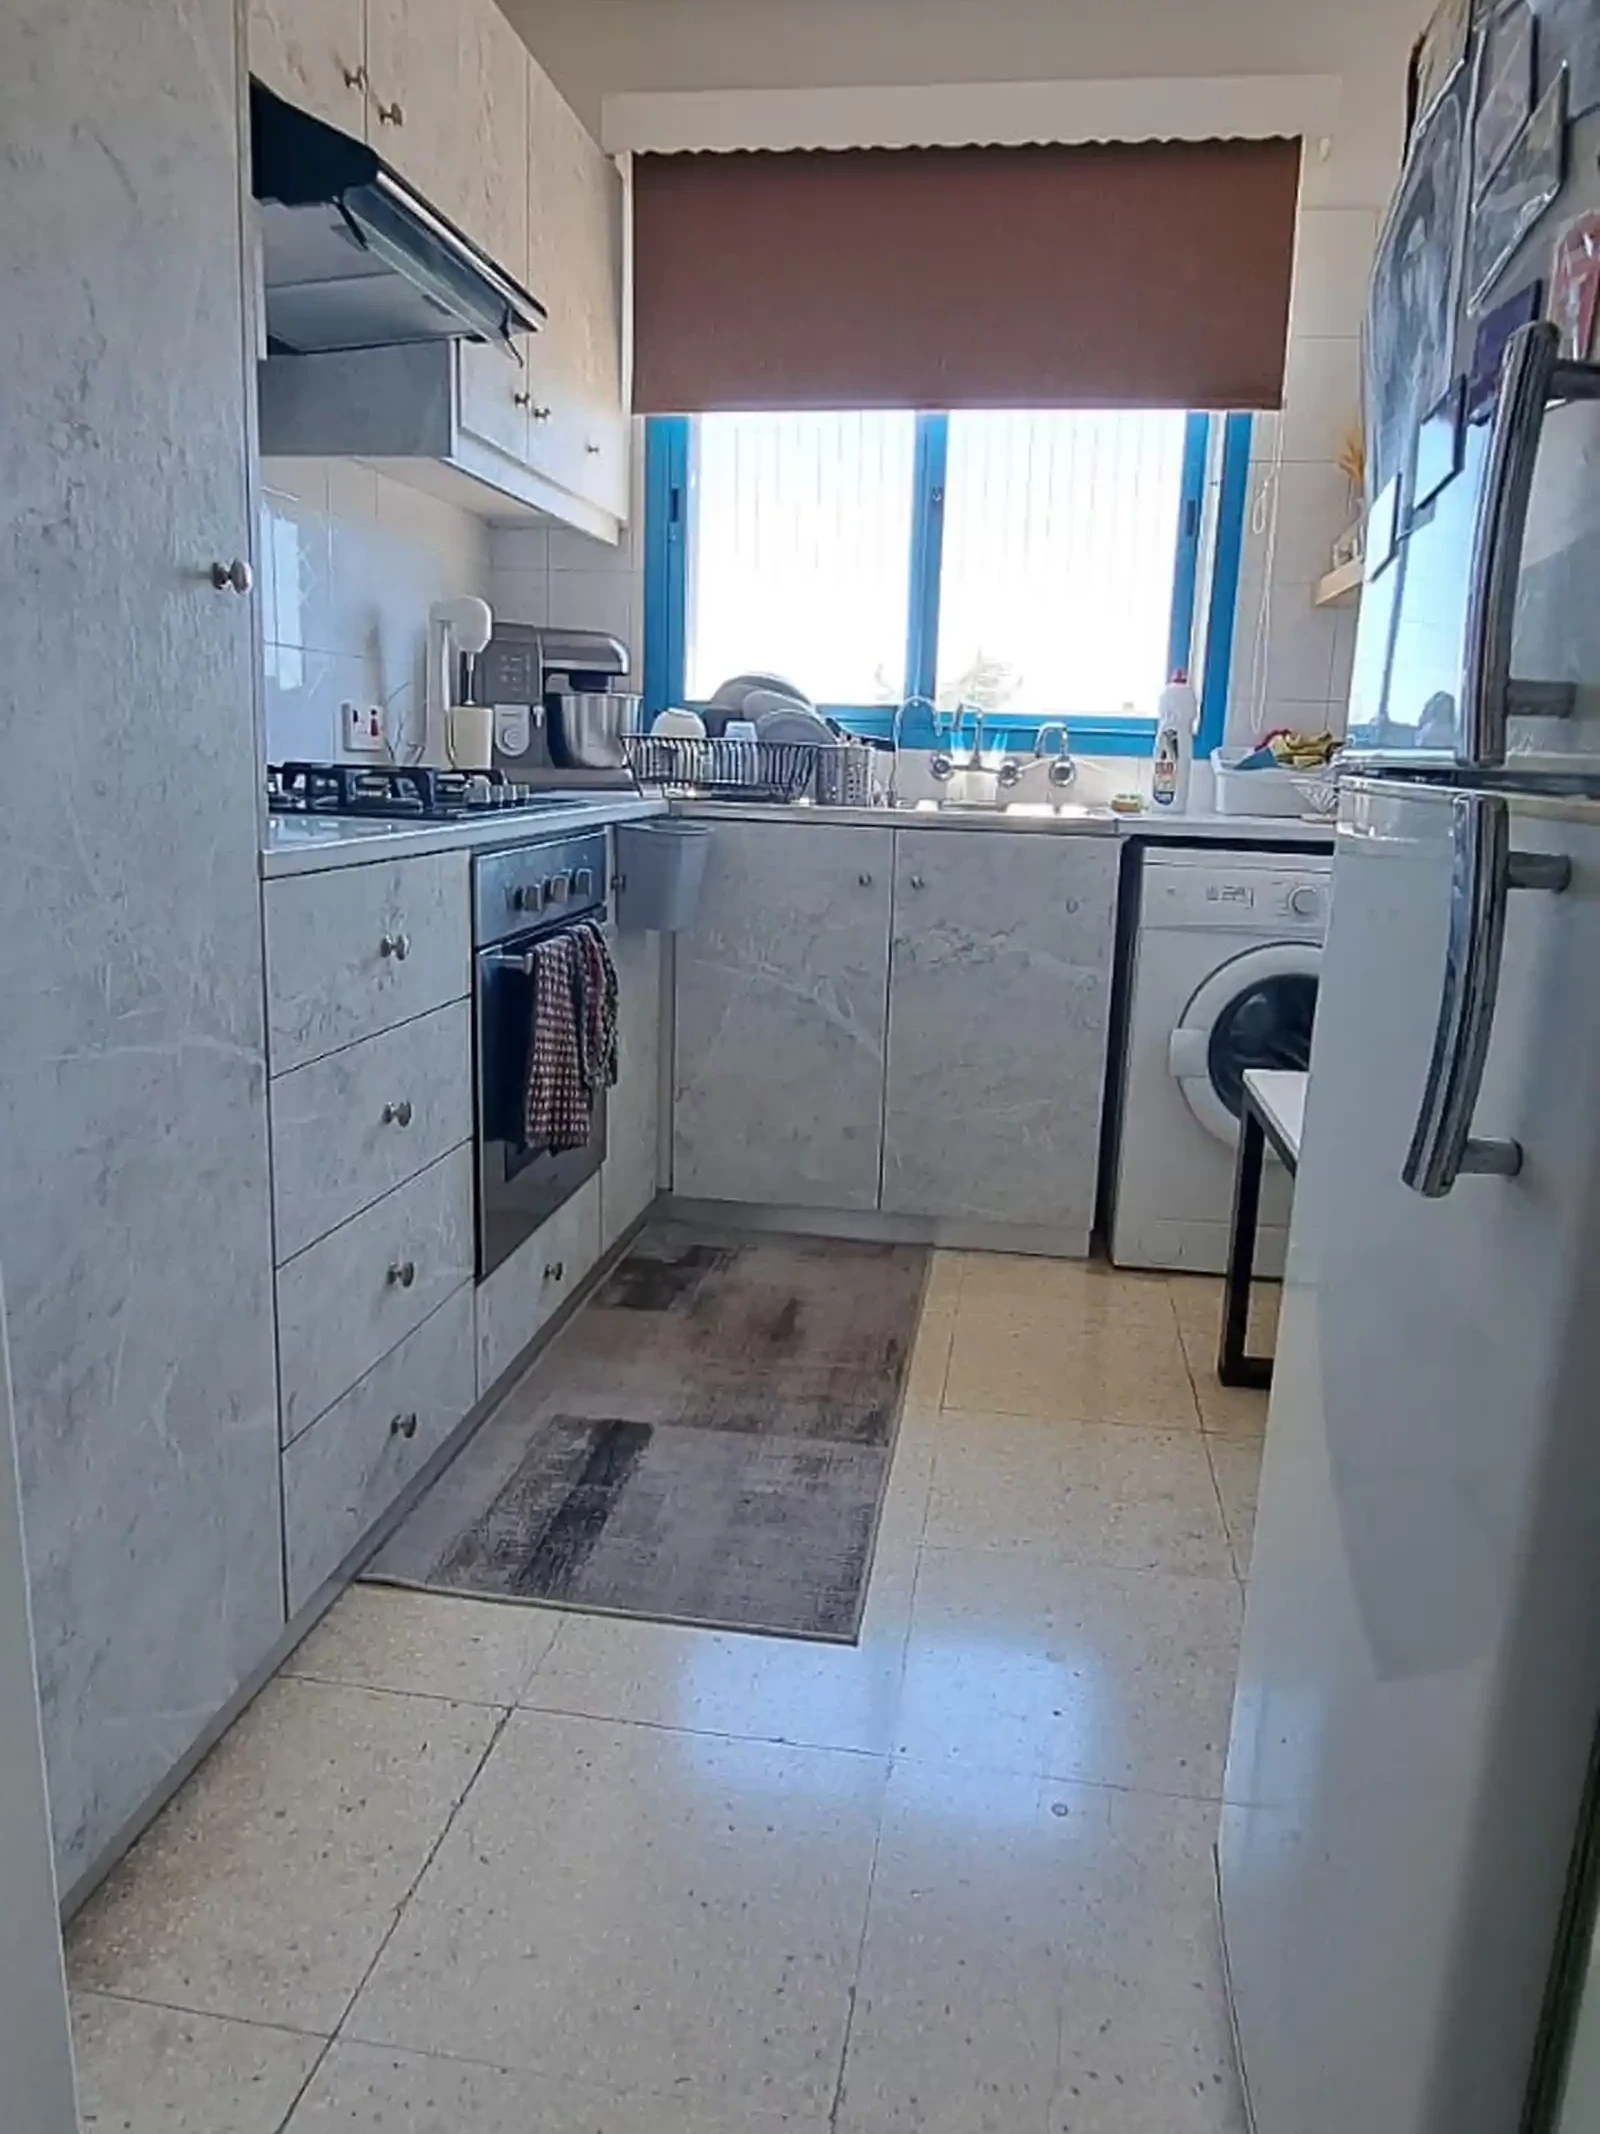 2-bedroom apartment fоr sаle €130.000, image 1